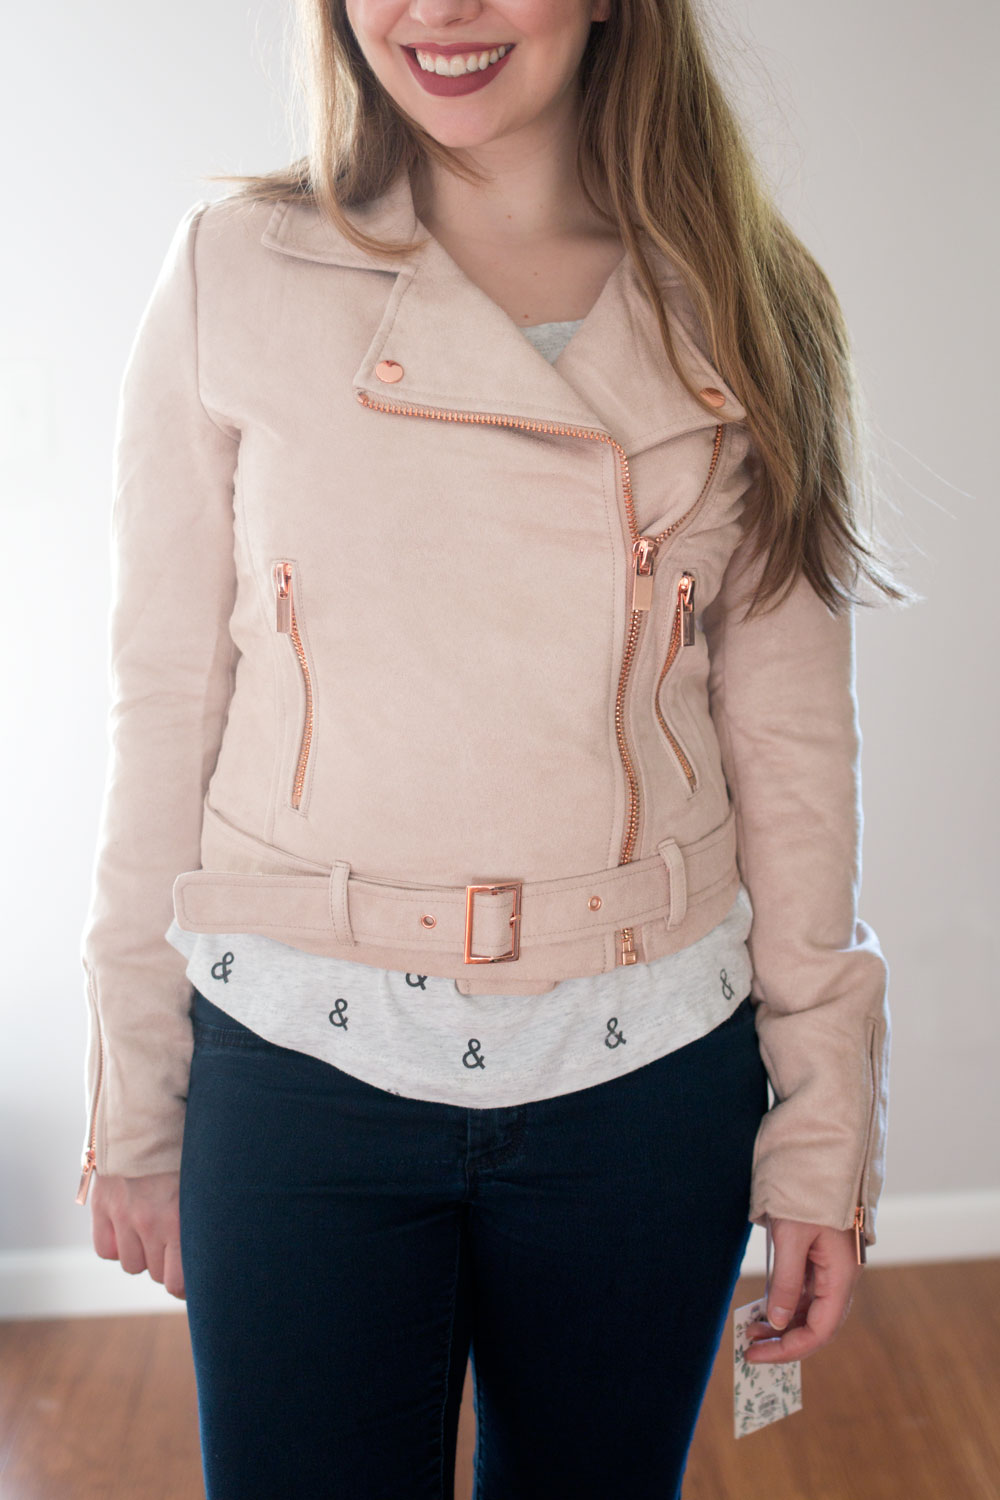 LC Lauren Conrad for Kohl's Collection [First Look] 